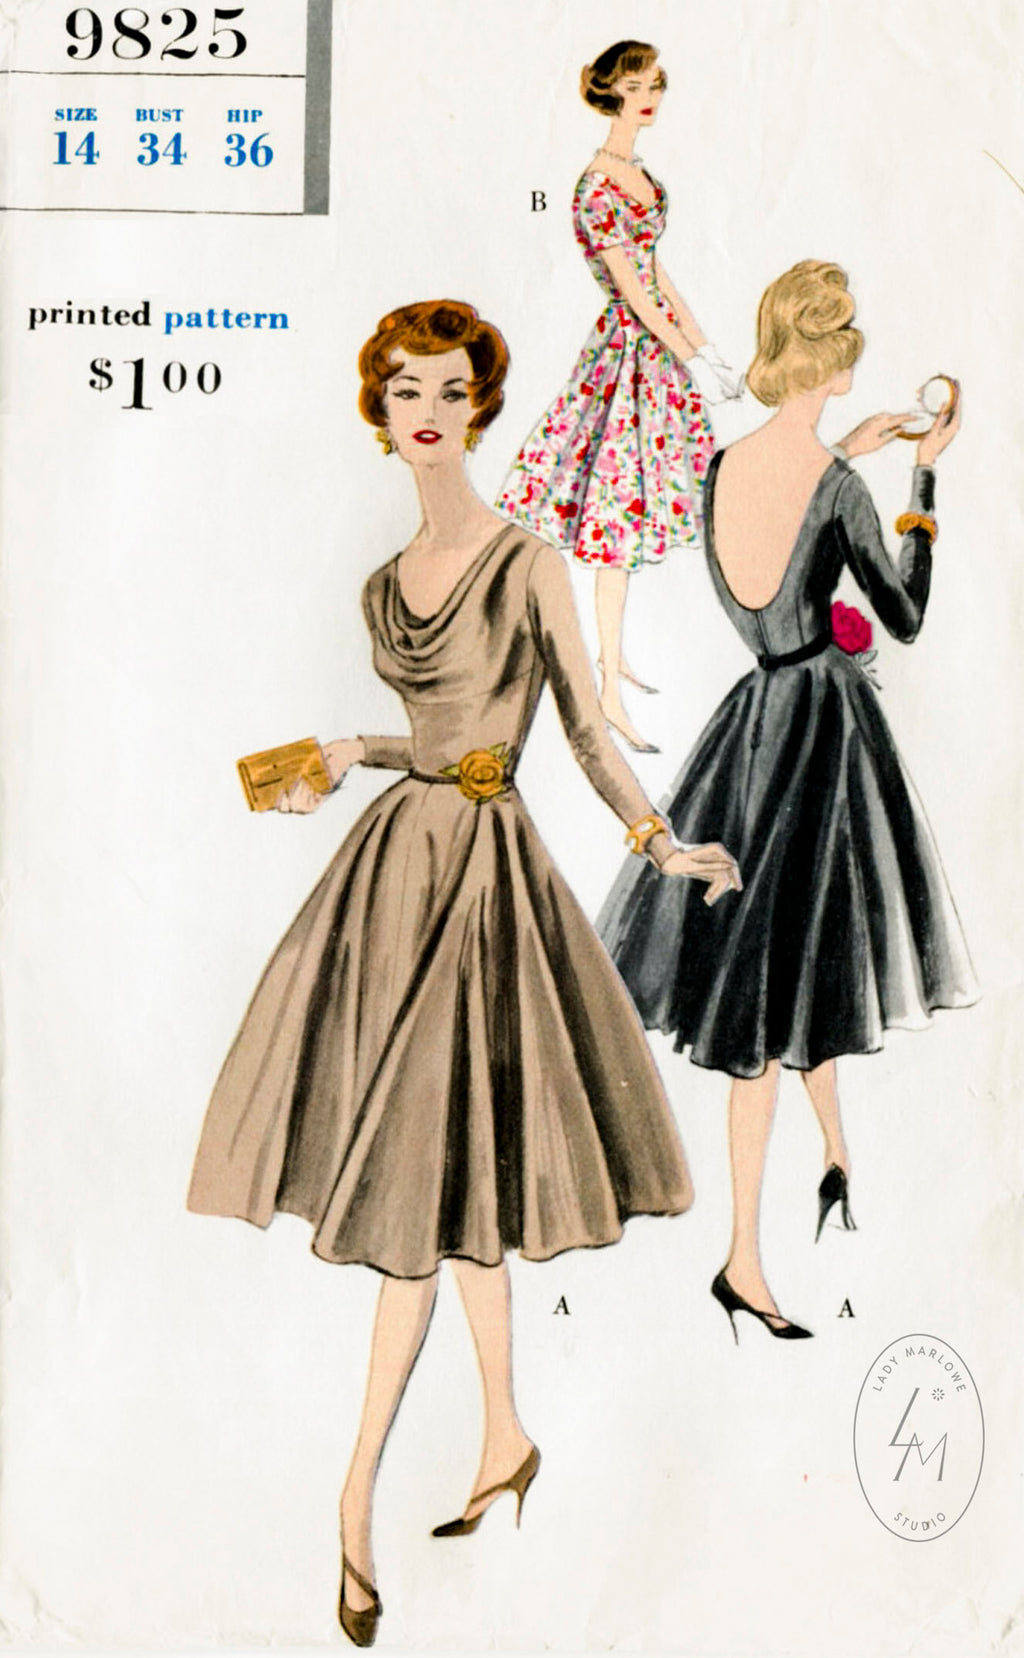 Vogue 9825 1950s dress sewing pattern vintage gown